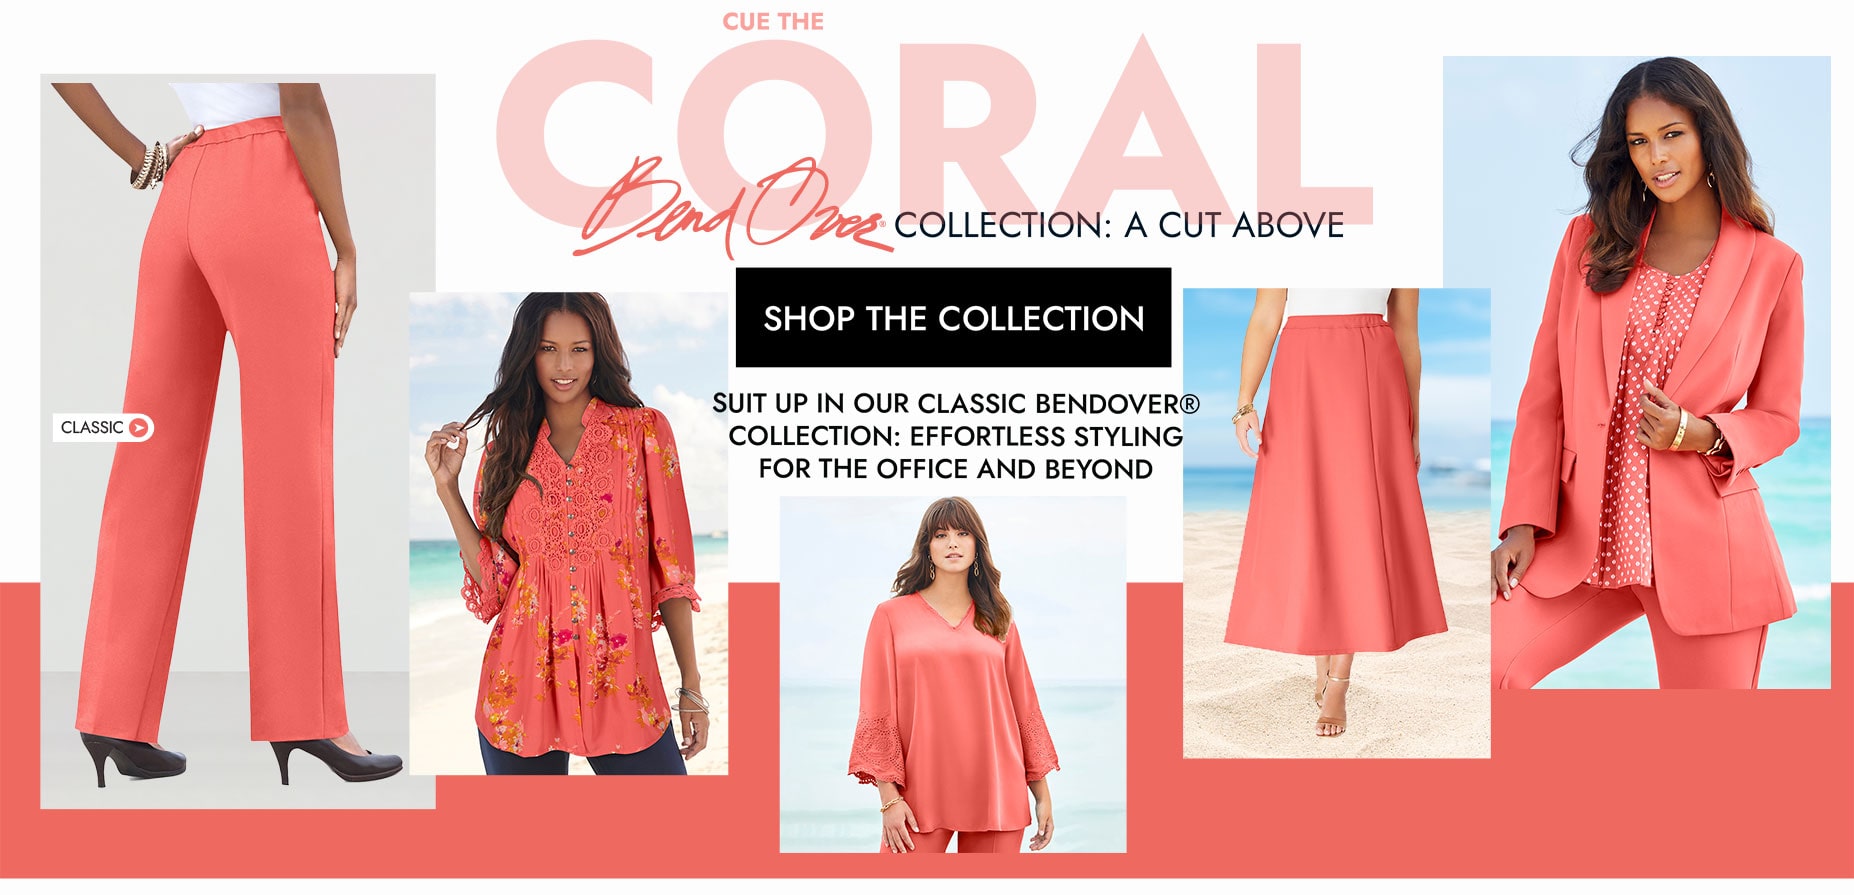 Cue the coral Bend Over Collection: A cut above. Shop the collection